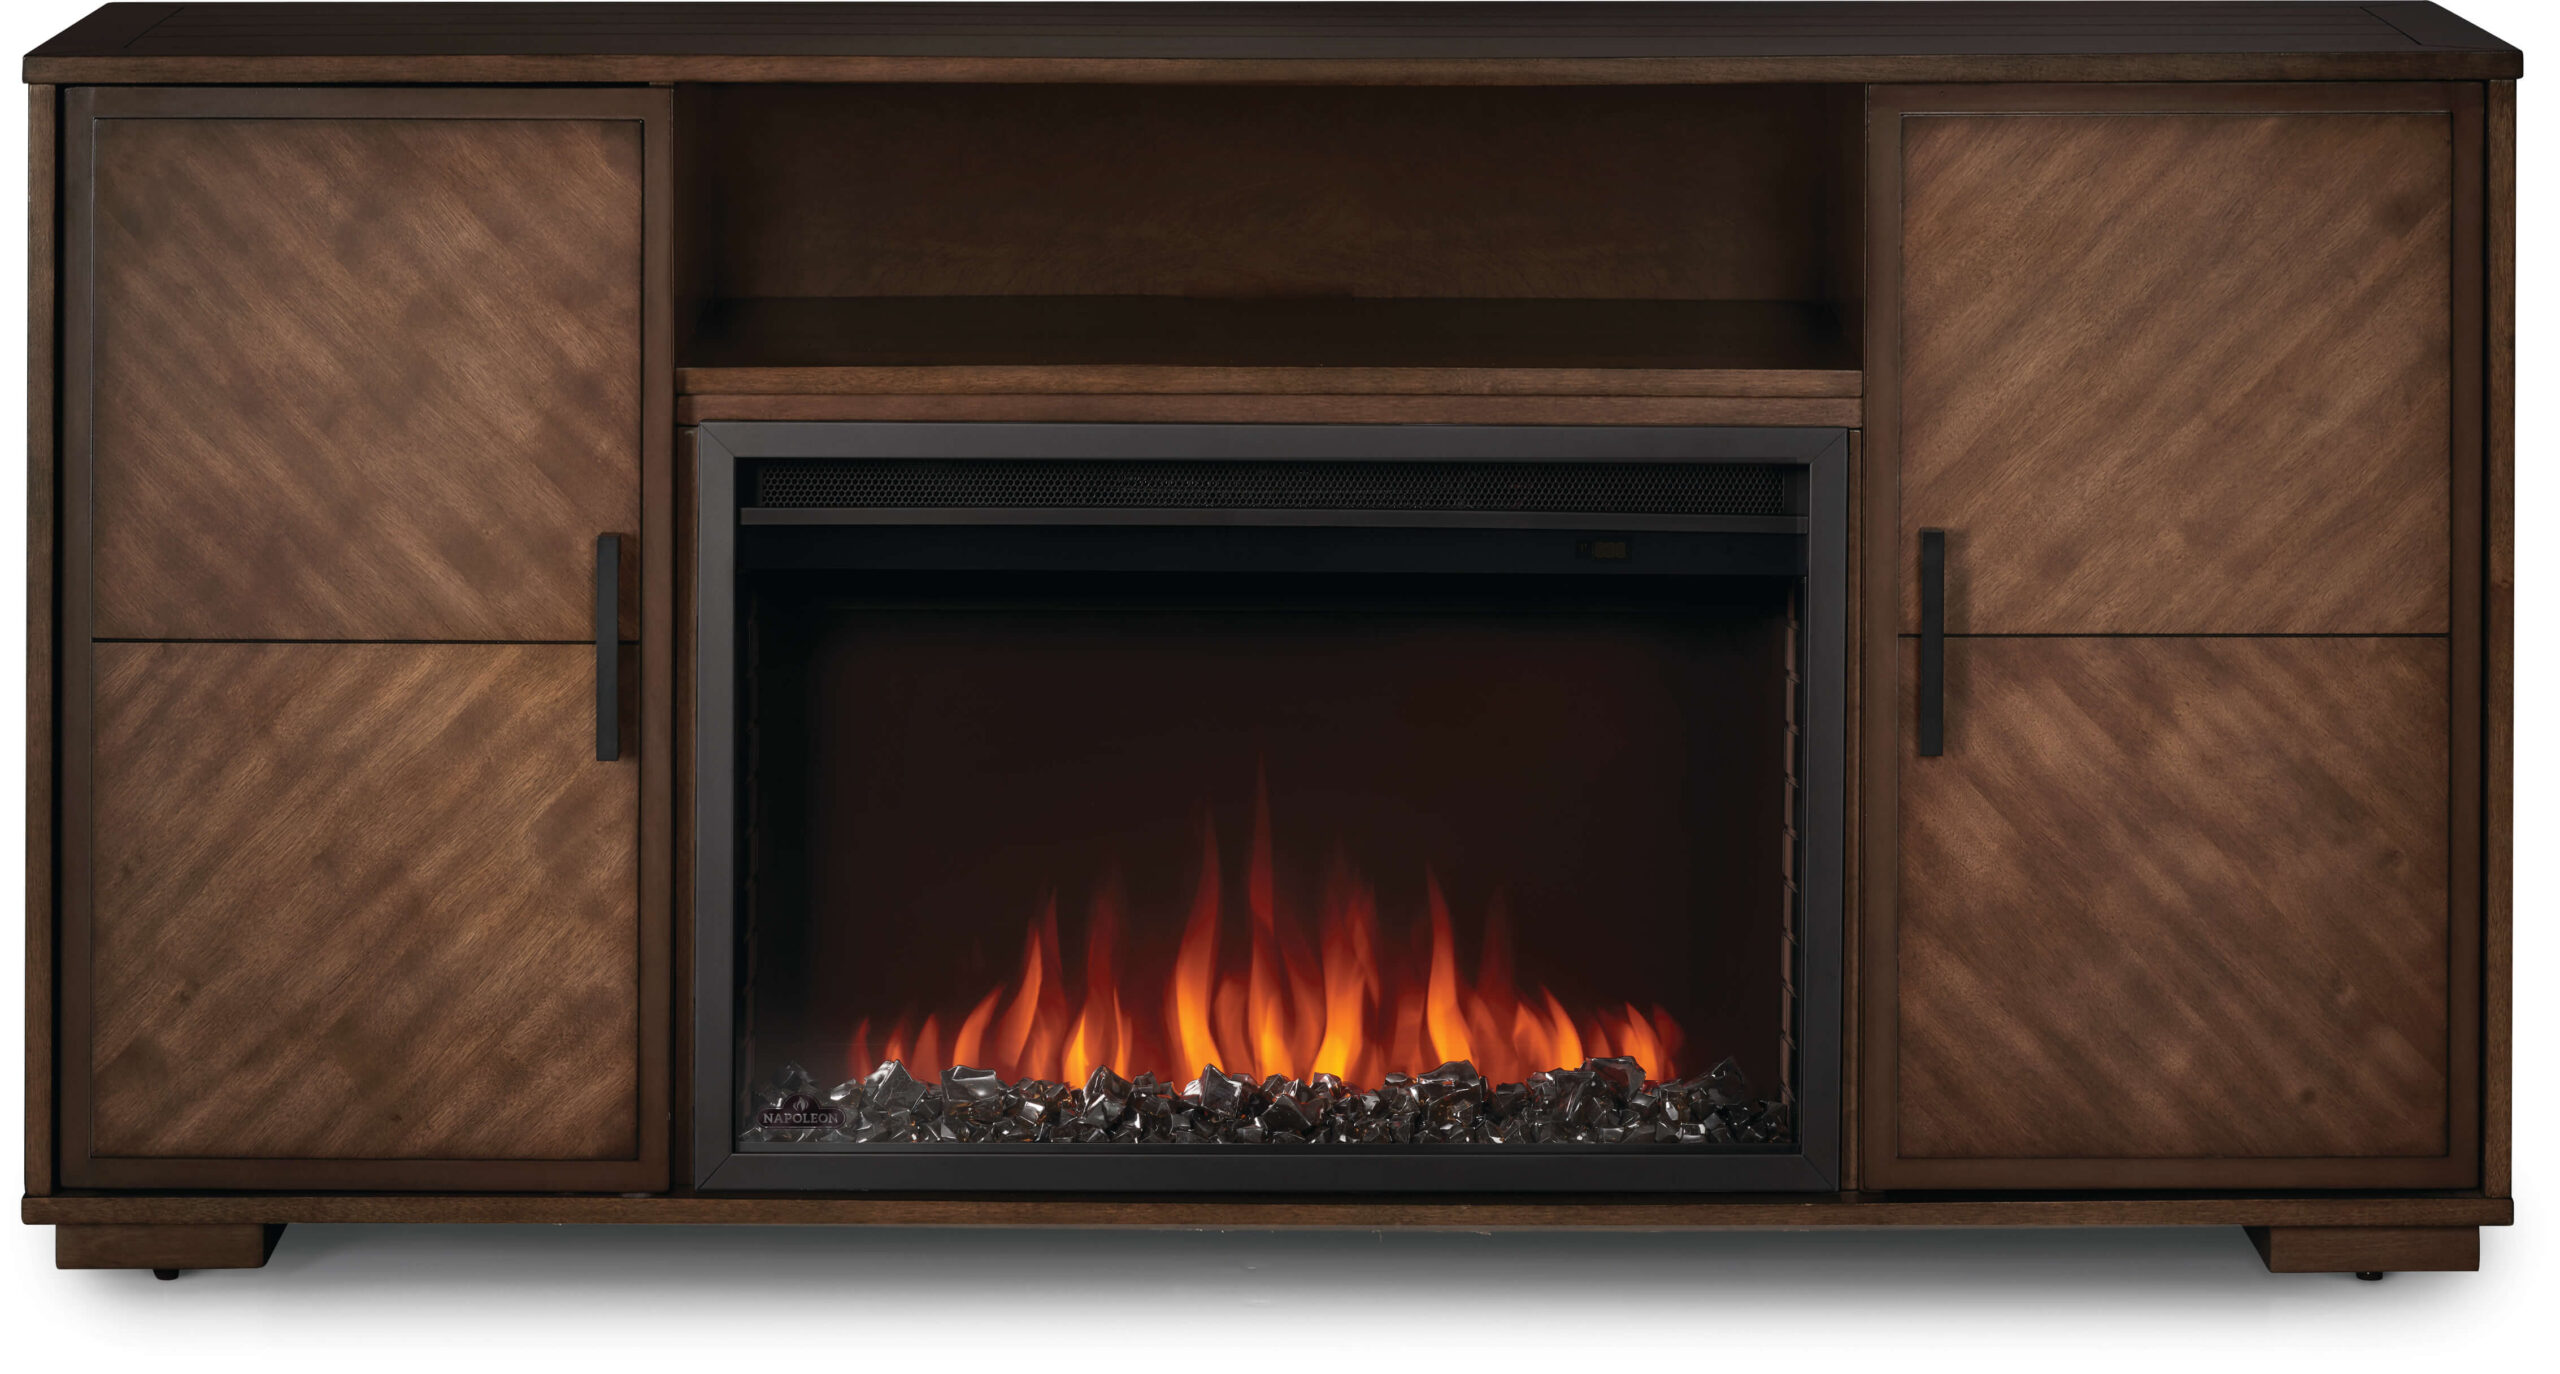 NAPOLEON HAYWORTH NEFP30-3620RLB MEDIA CABINET WITH CINEVIEW ELECTRIC FIREPLACE